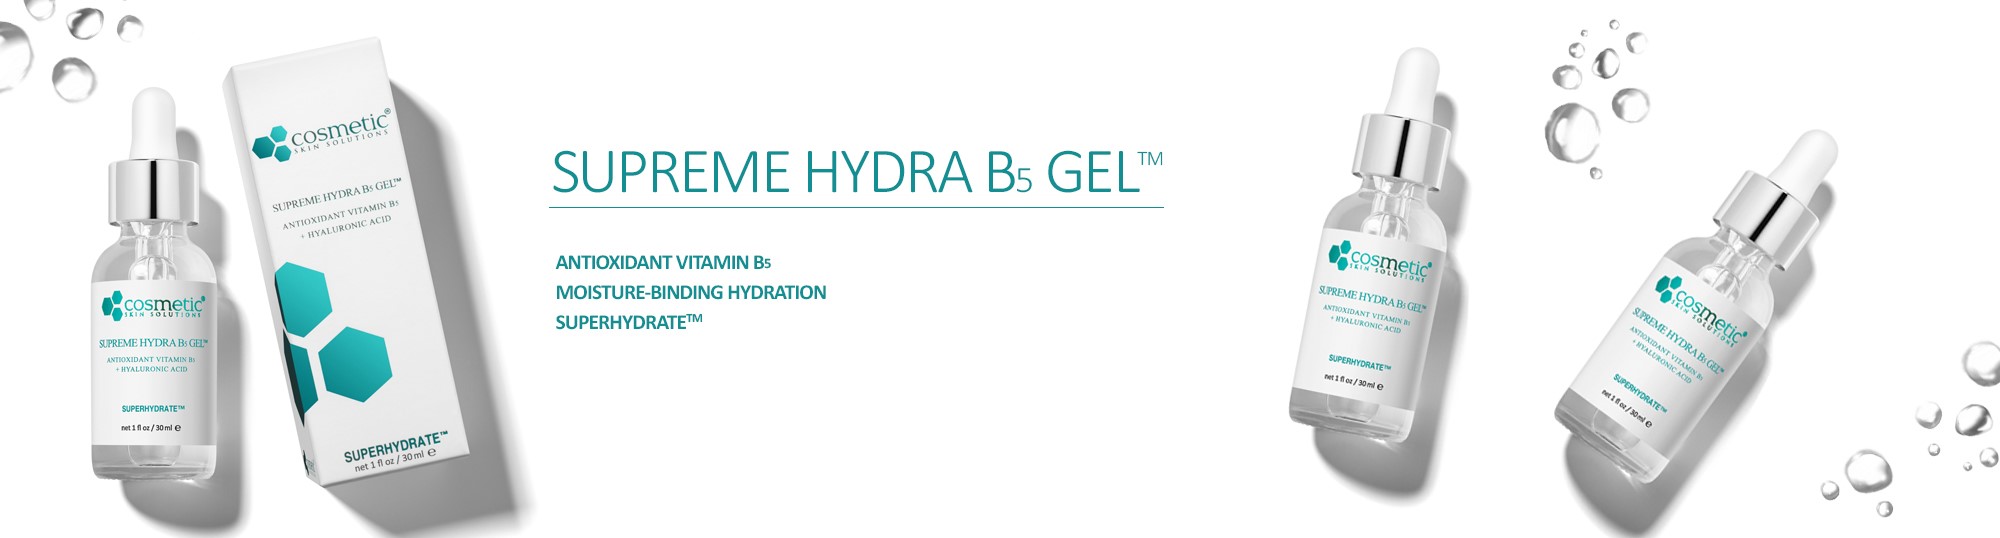 Supreme Hydra B5 Gel™ | SUPERHYDRATE™ Properties | Cosmetic Skin Solutions Combines antioxidants vitamin B5 to SUPERHYDRATE™ depleted moisture levels critical to the proper maintenance to balance skin hydration levels.